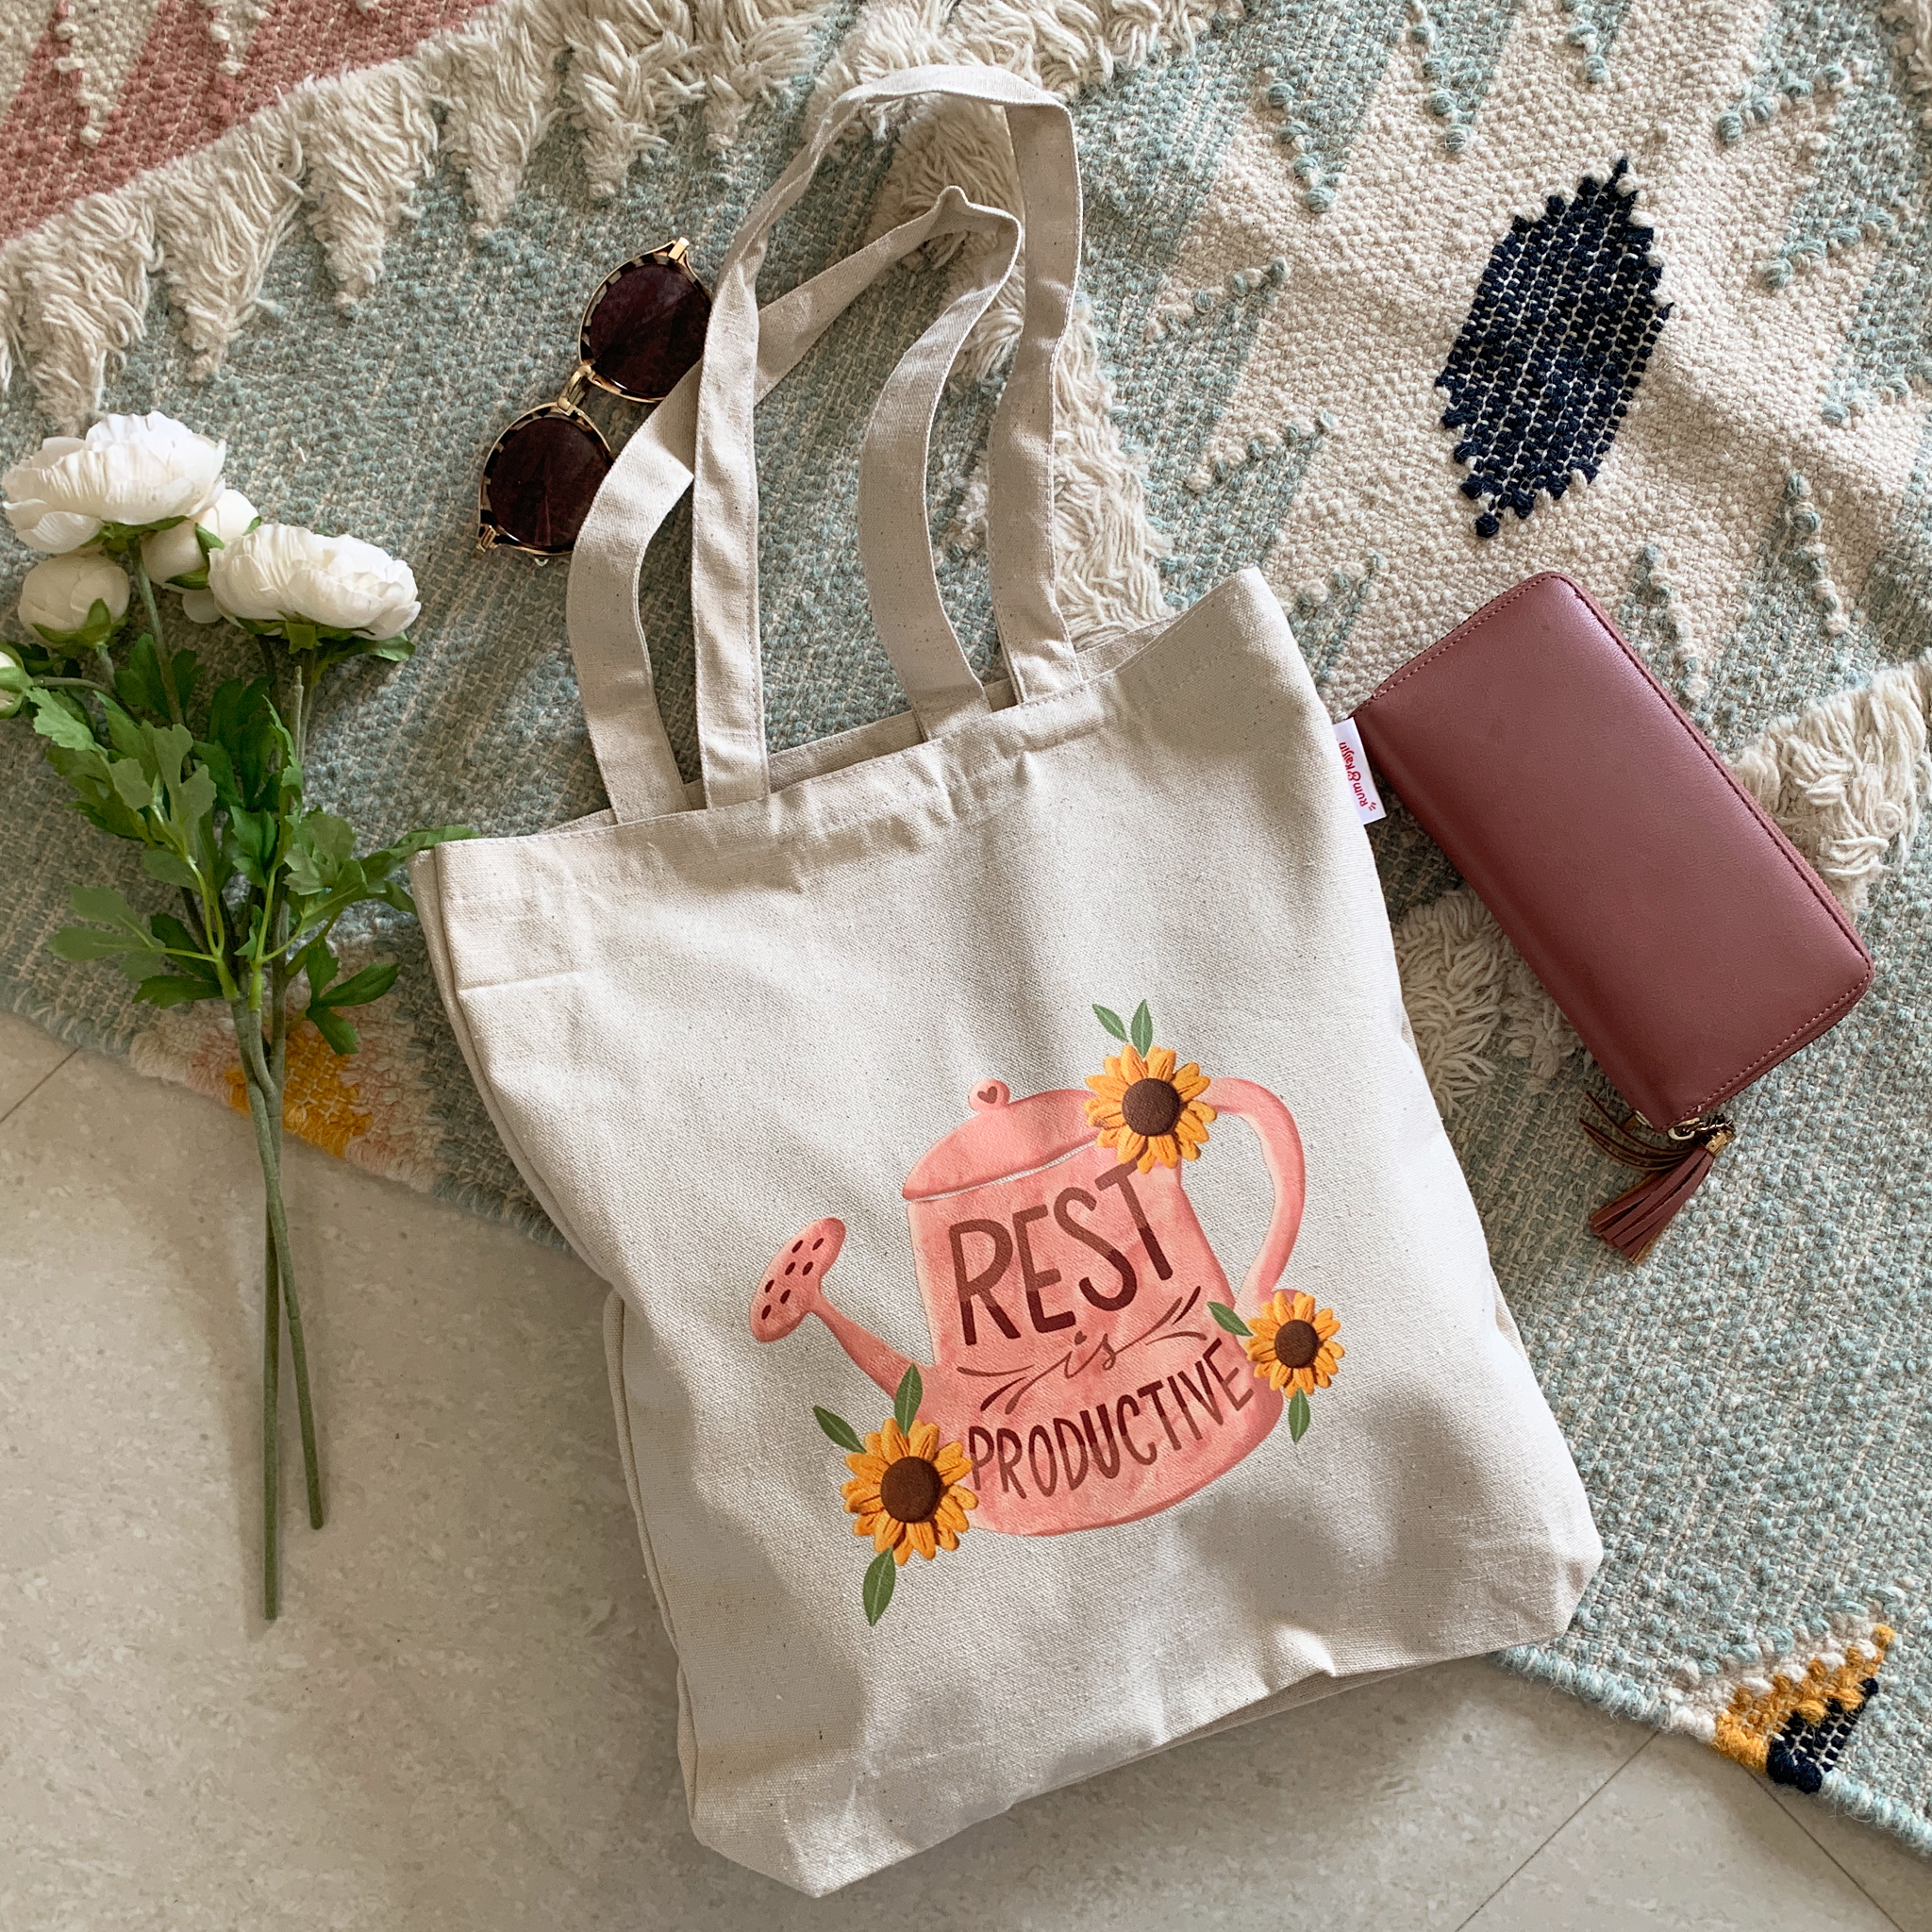 Rest is Productive - Tote